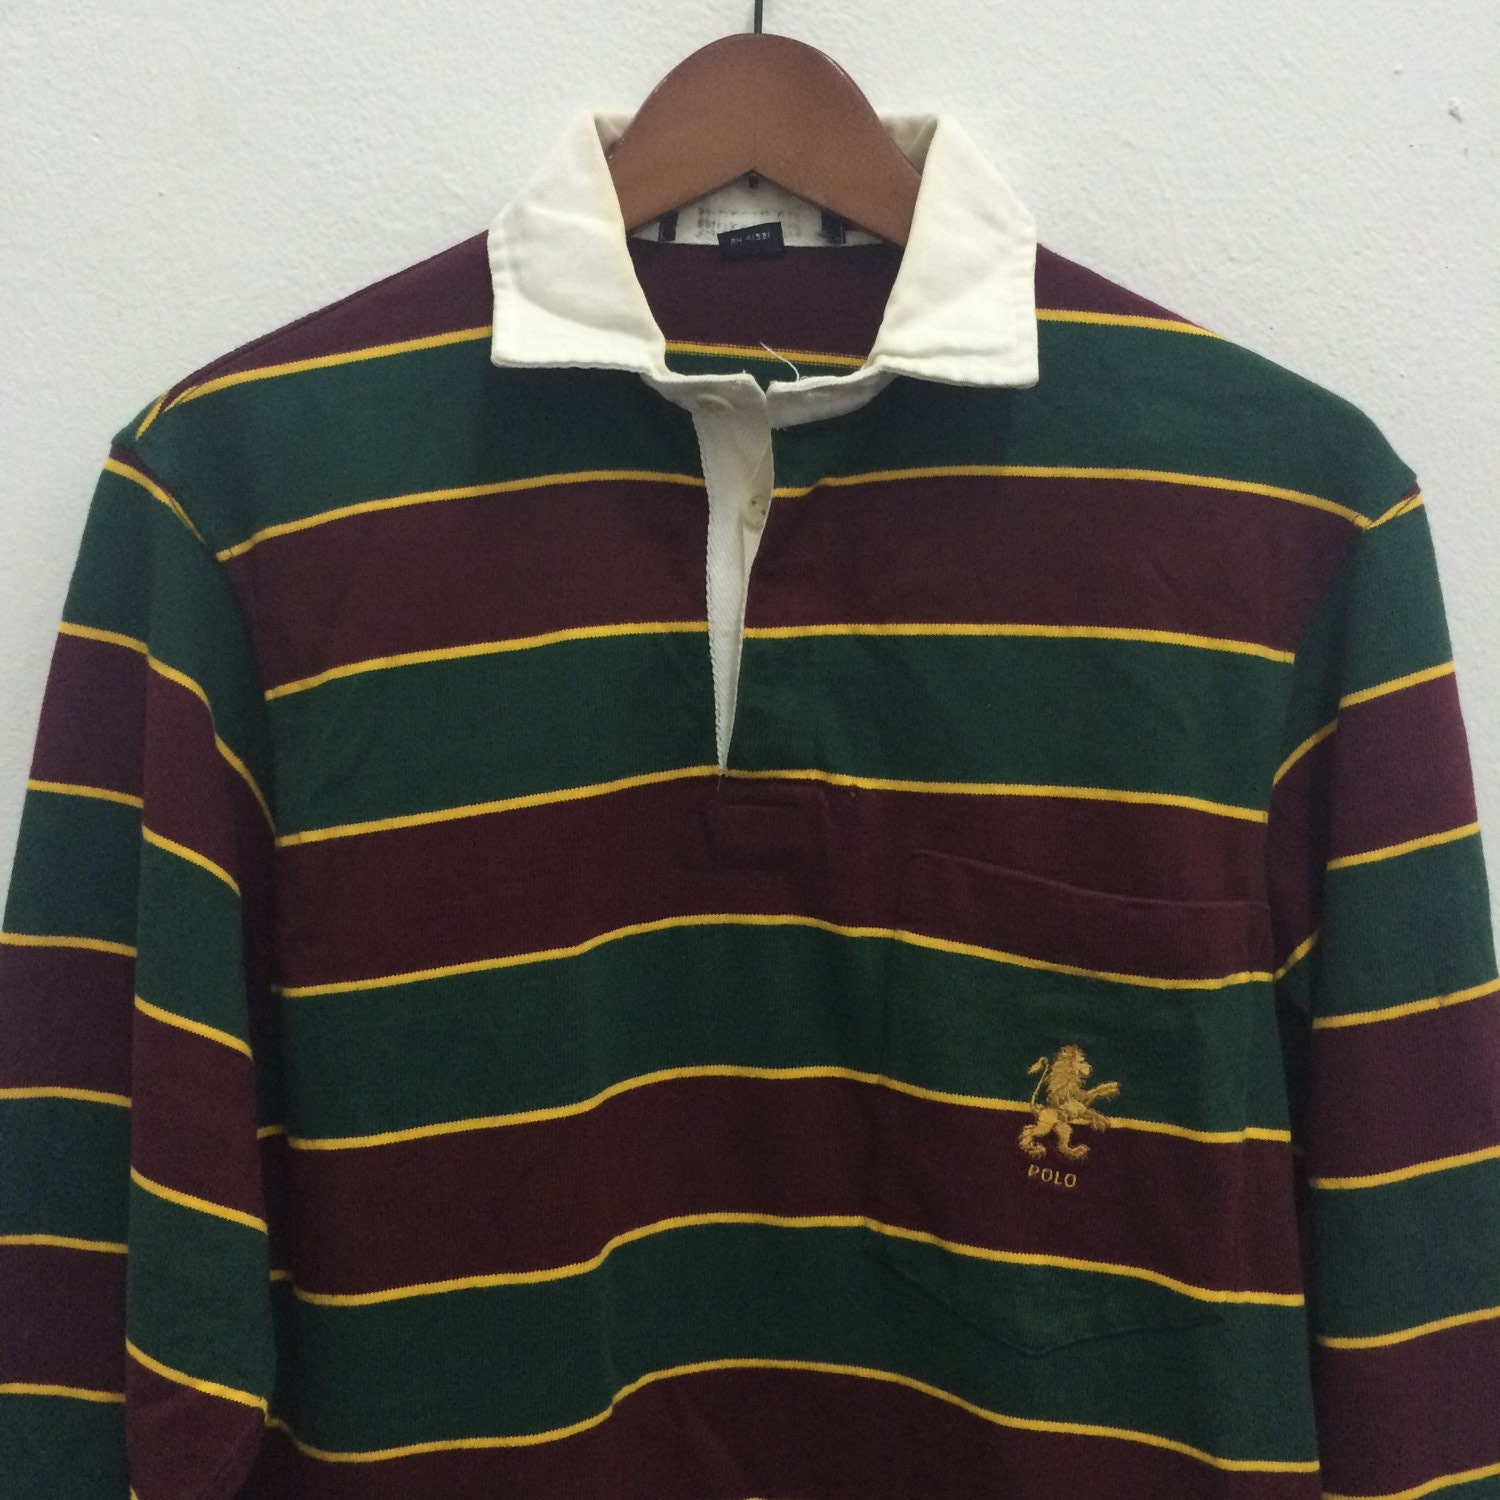 Vintage Polo Ralph Lauren Rugby Shirt Made In Usa by picknsale